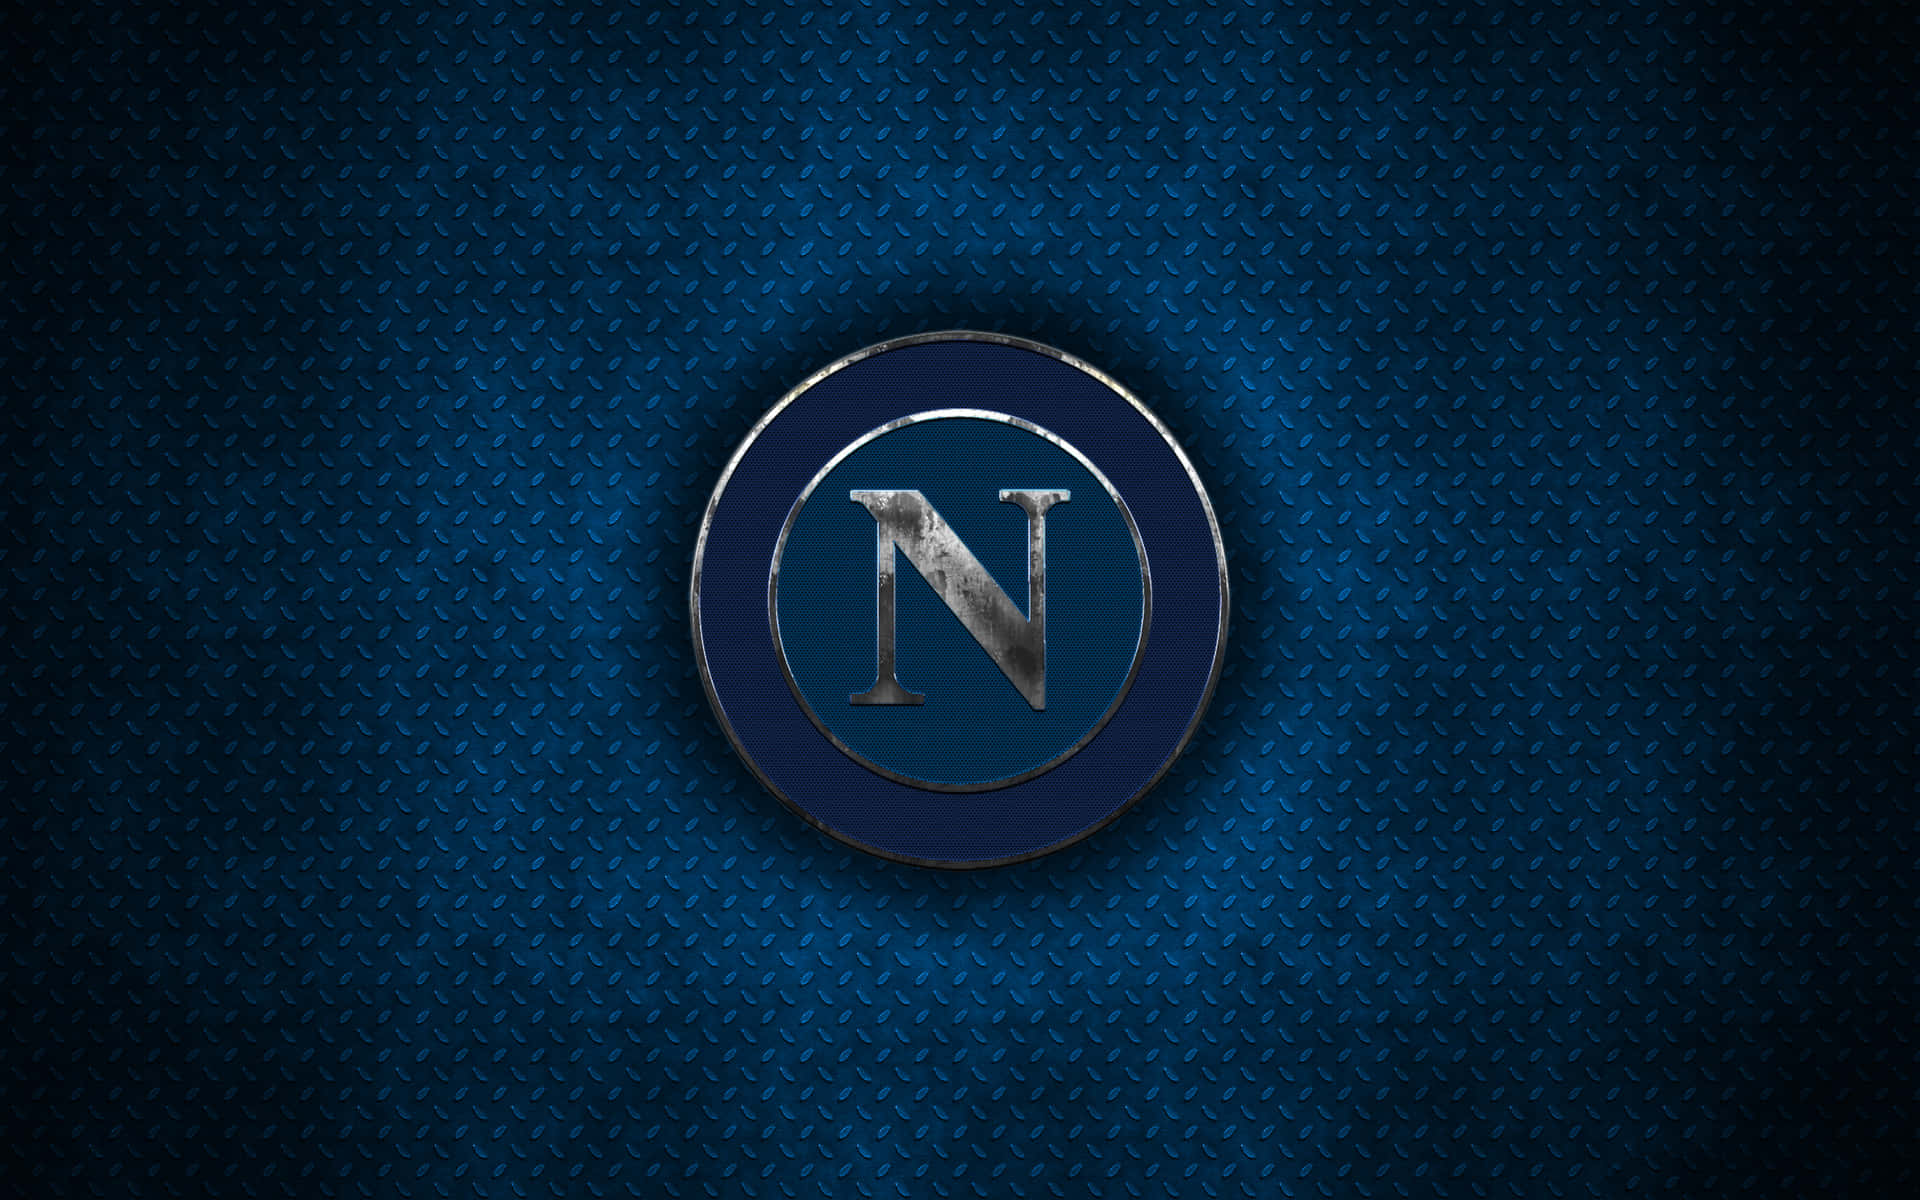 Download NAPOLI CHAMPIONS wallpaper by FGMANCHA - 87 - Free on ZEDGE™ now.  Browse millions of popular azul Wallpapers and Ri… | Napoli, Football  wallpaper, Champion